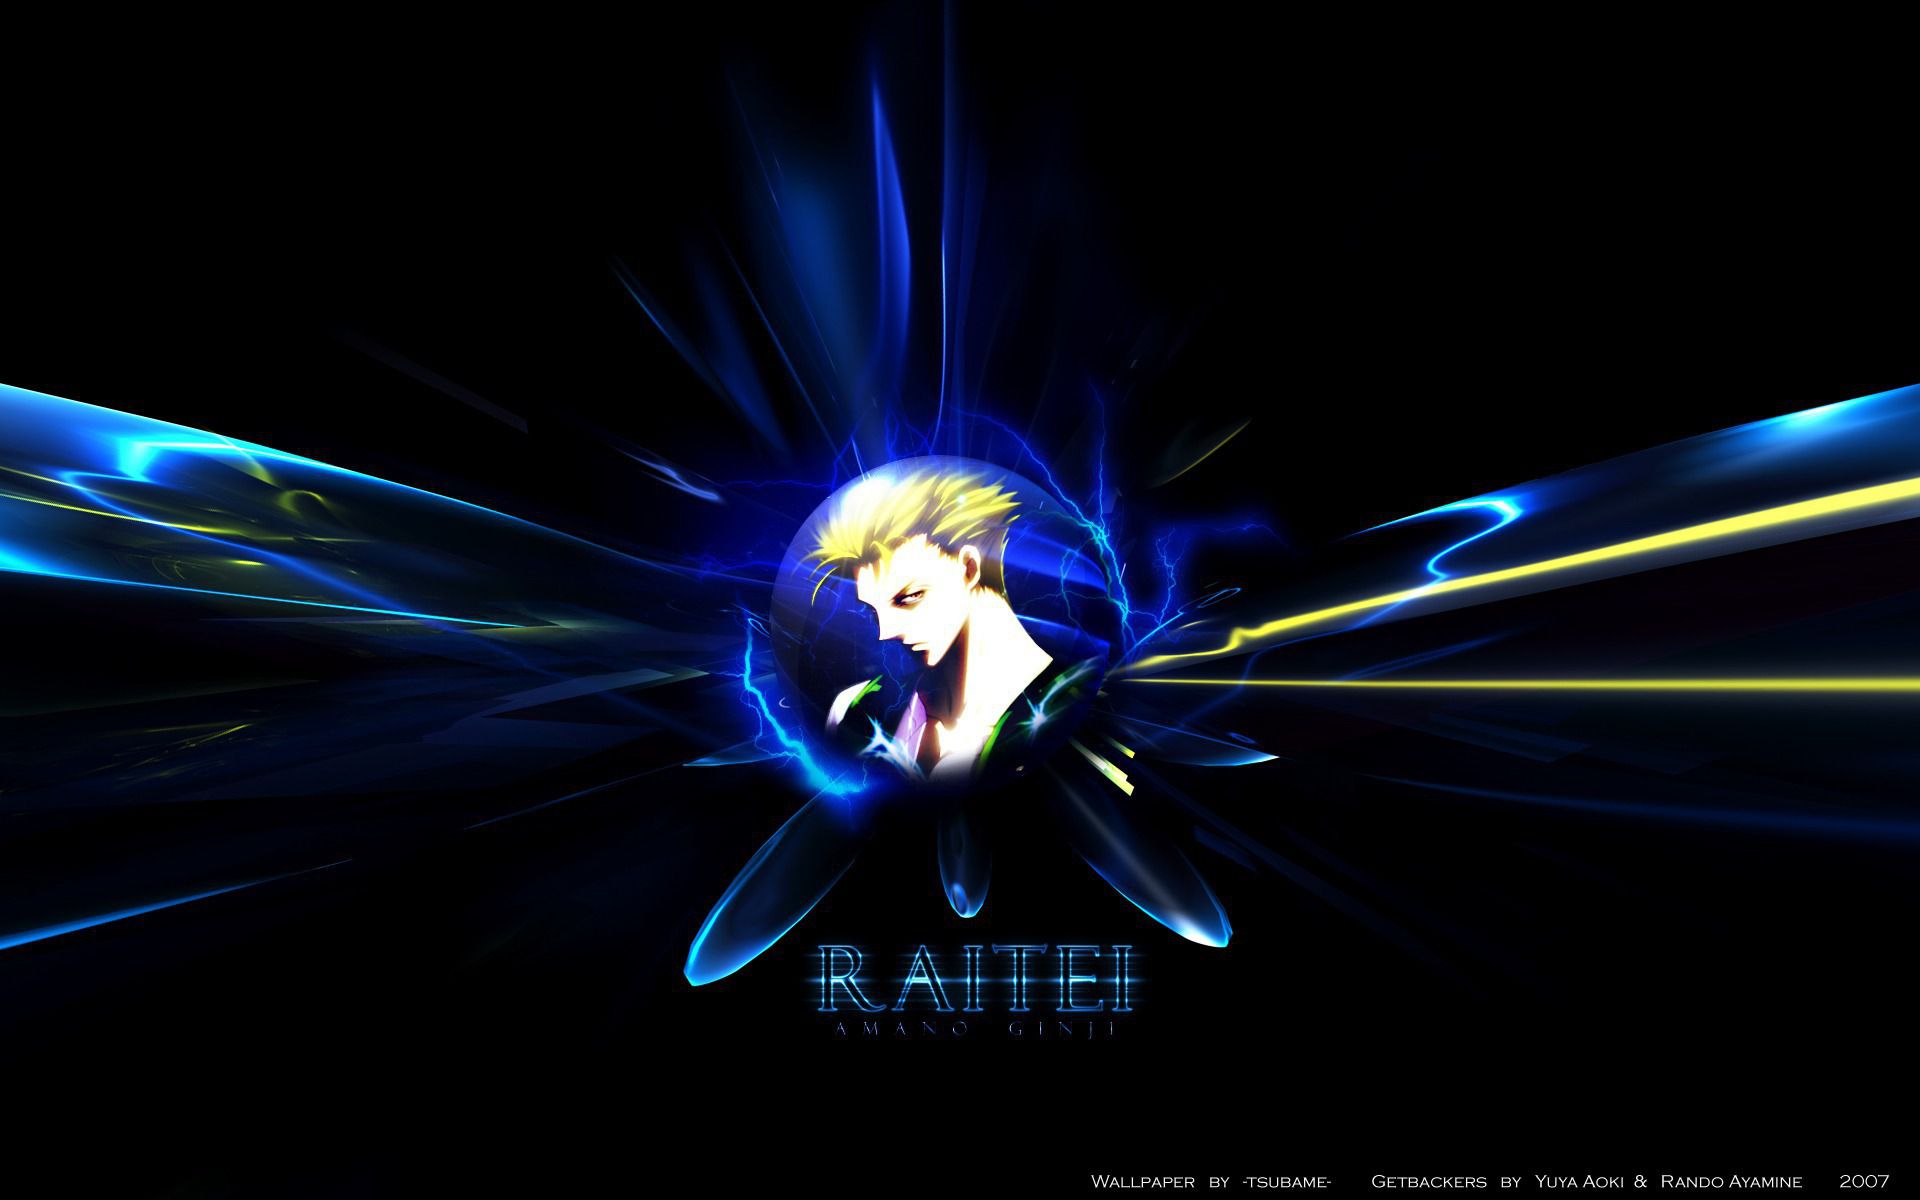 Get Backers - Get Backers & Anime Background Wallpapers on Desktop